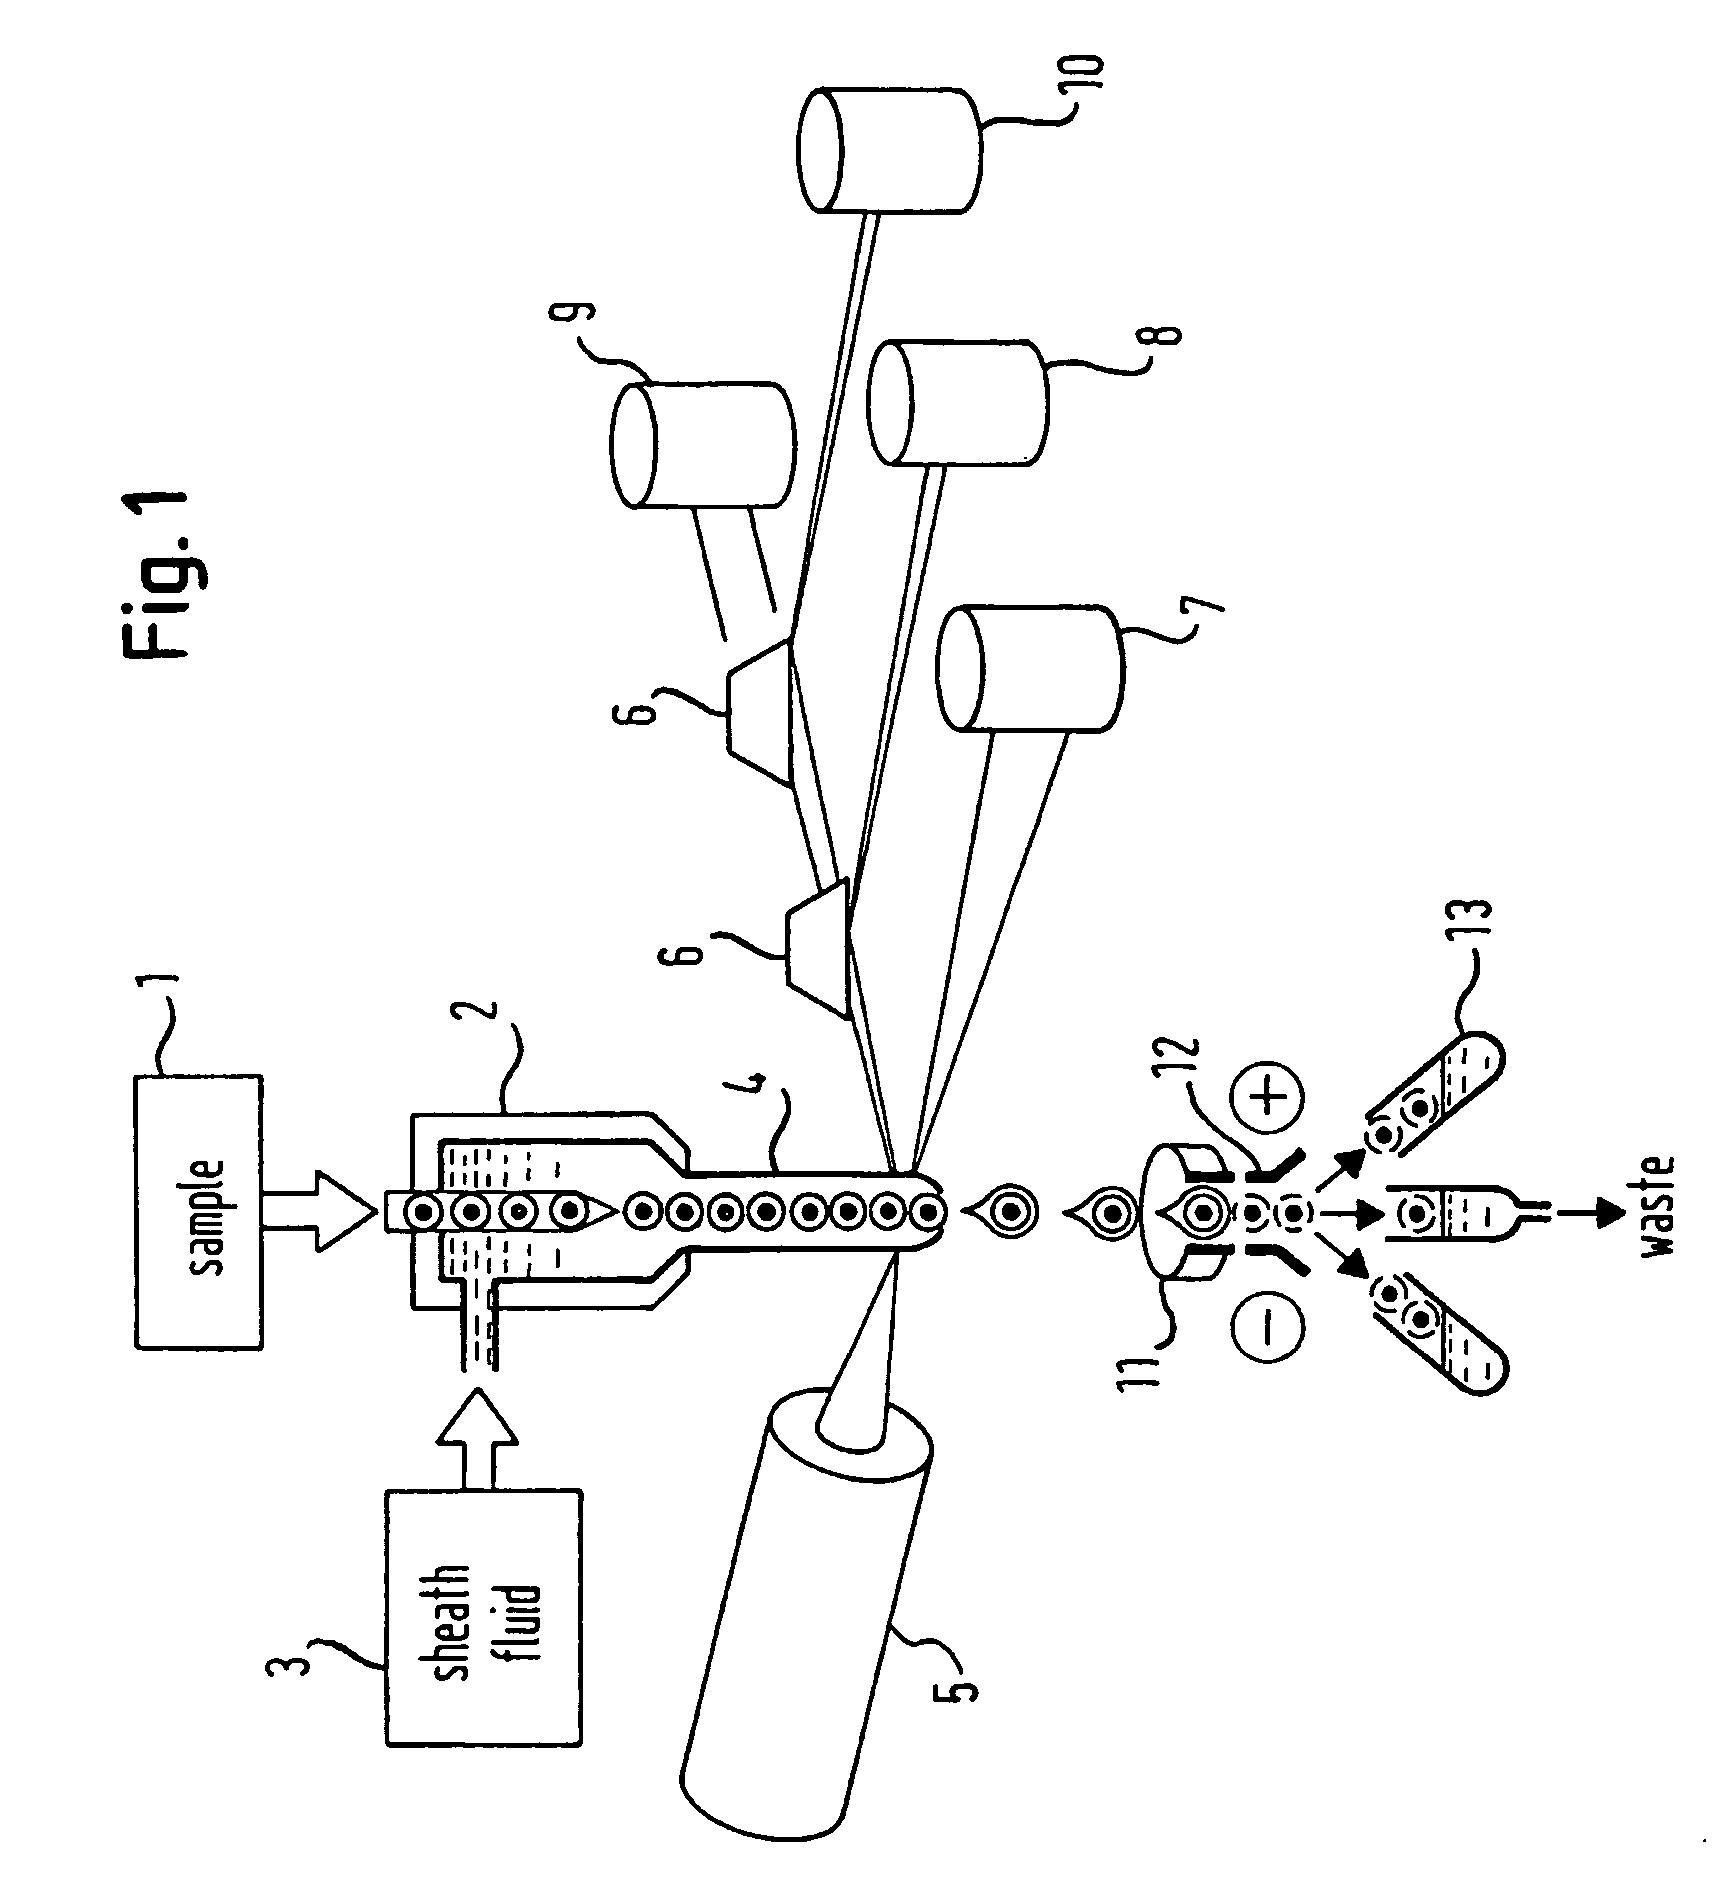 Device and method for investigating analytes in liquid suspension or solution